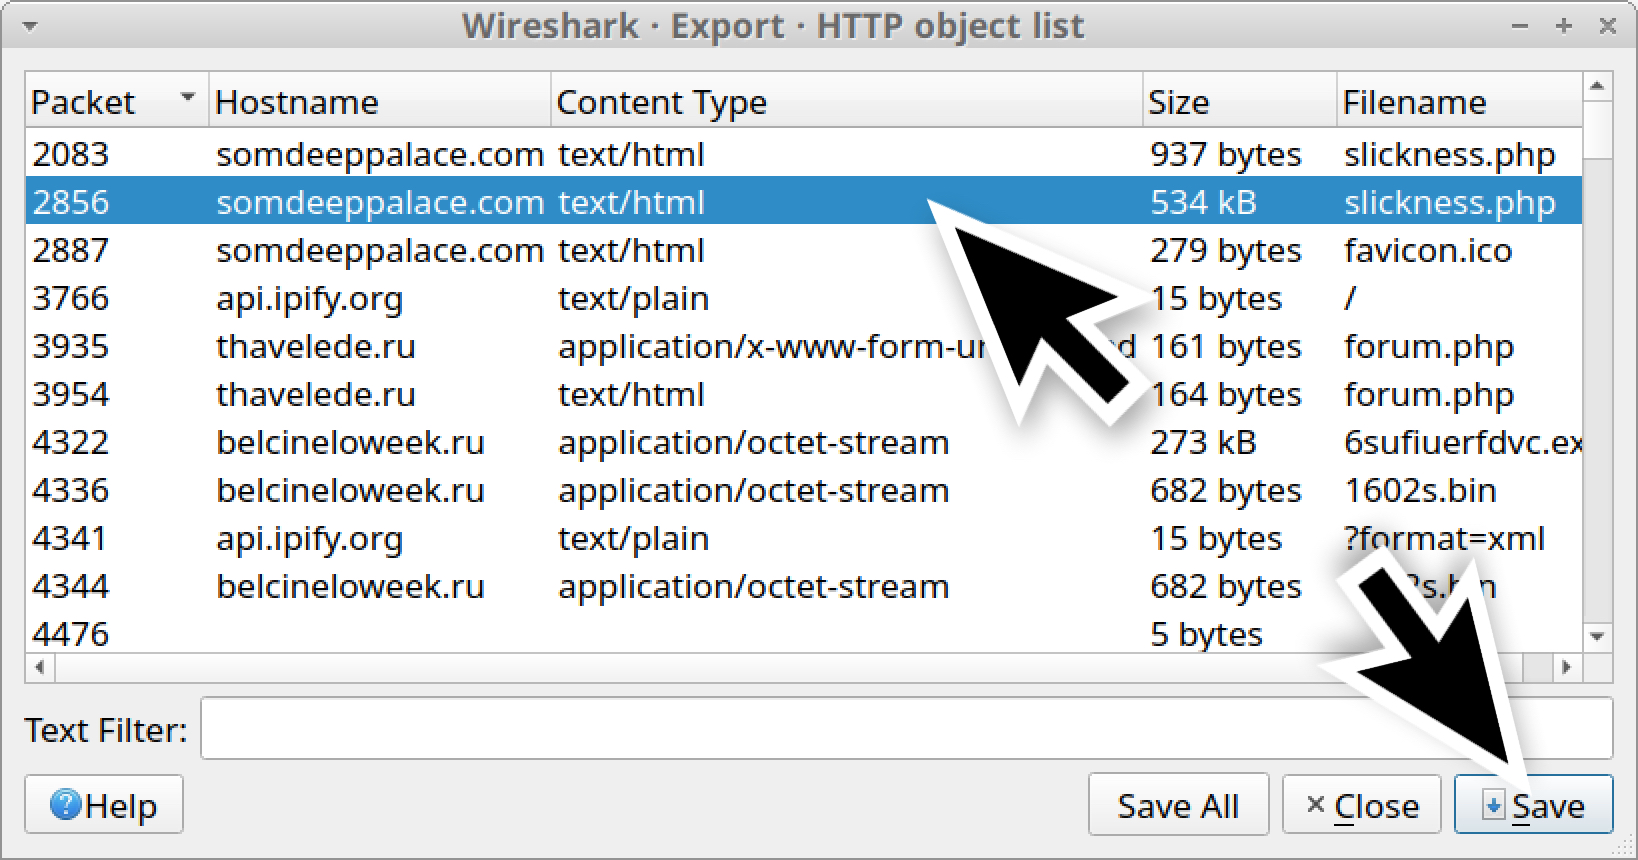 Large black arrows indicate where to find the second entry for slickness.php, and then how to save it as a web page. 